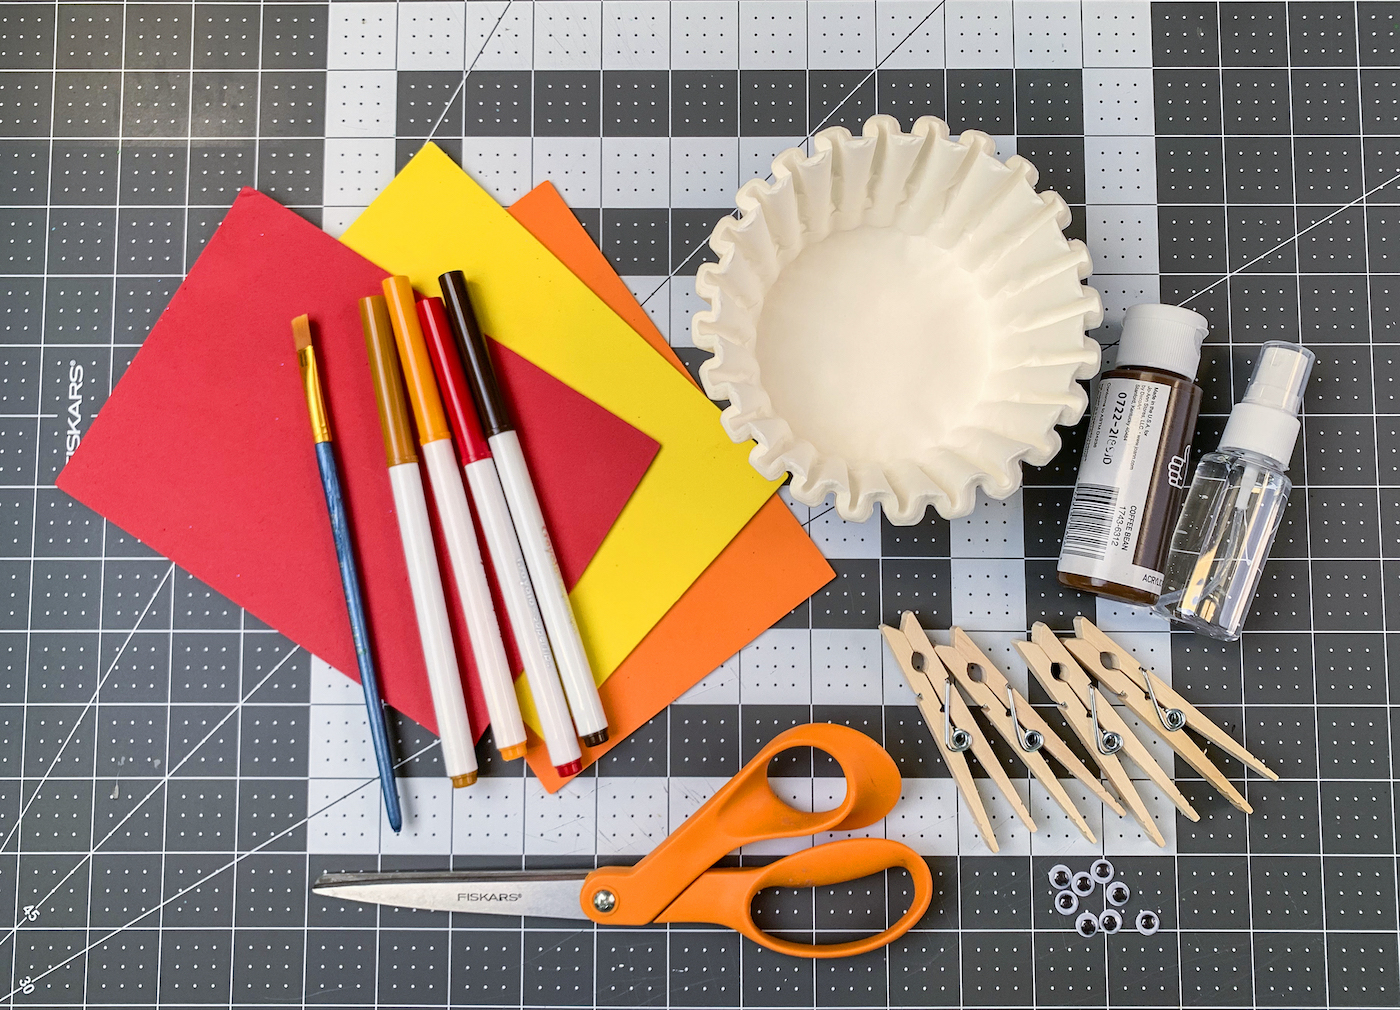 Coffee filters, craft foam, washable markers, clothespins, scissors, googly eyes, paintbrush